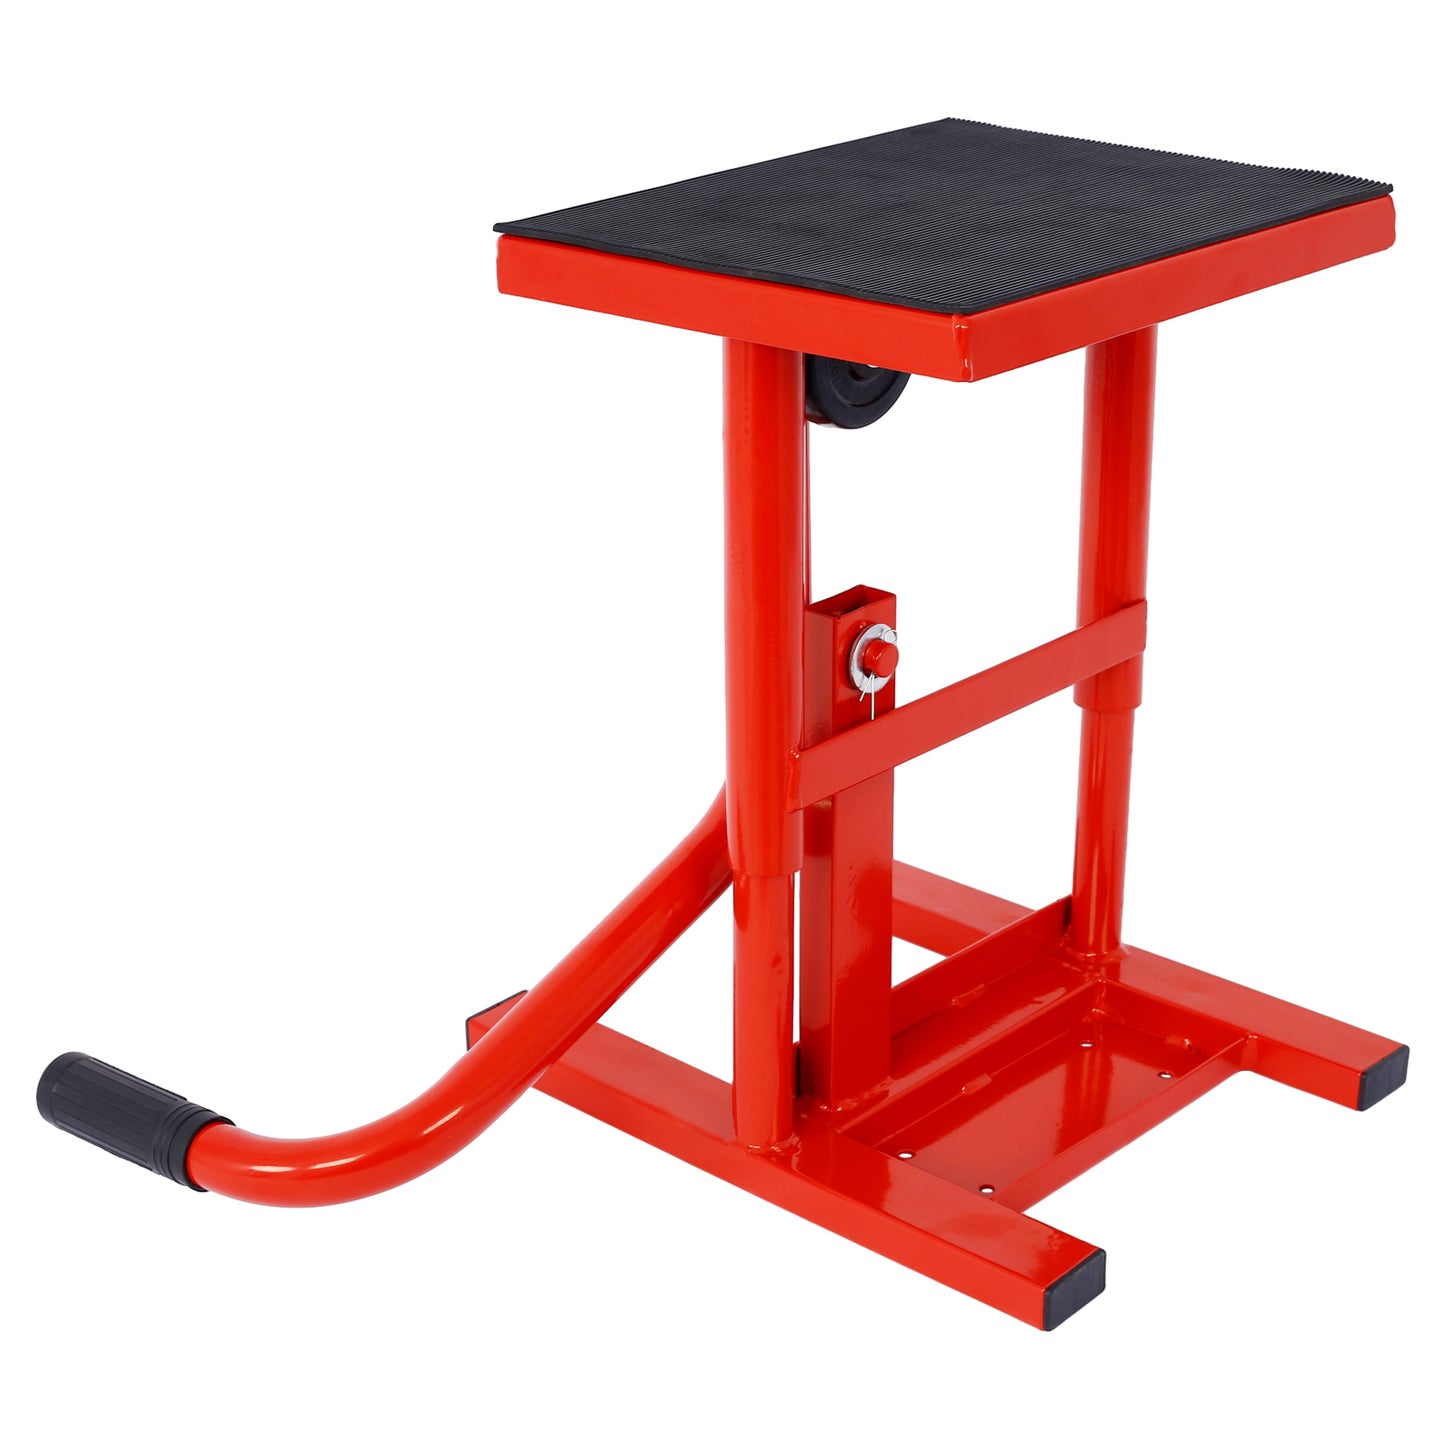 Motorcycle Dirt Bike Stands and Lifts Jack Stand Steel Lift 11"-16.5" Adjustable Height 330 LBS Load Capacity  Heavy Duty Steel  Red